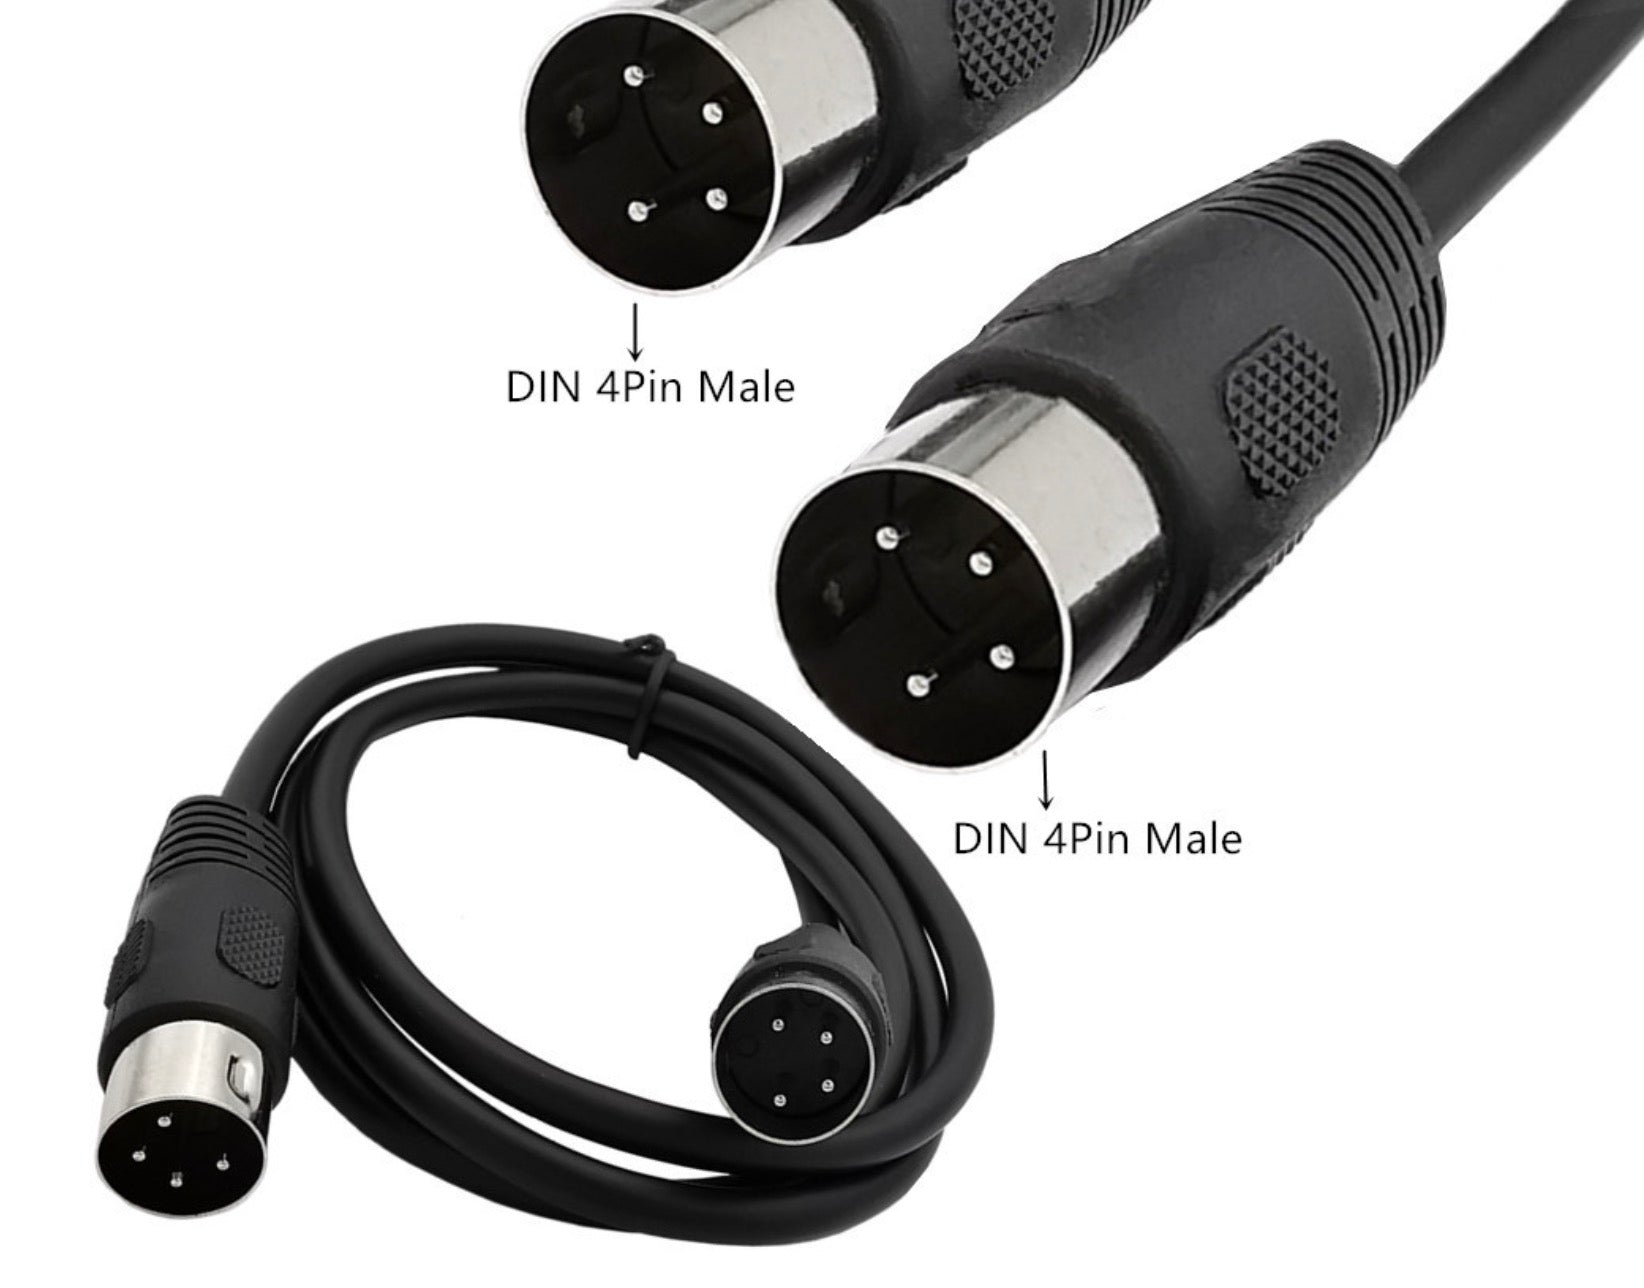 4-Pin Din Male to Male Power Cable for Din Audio Connector Digital Devices